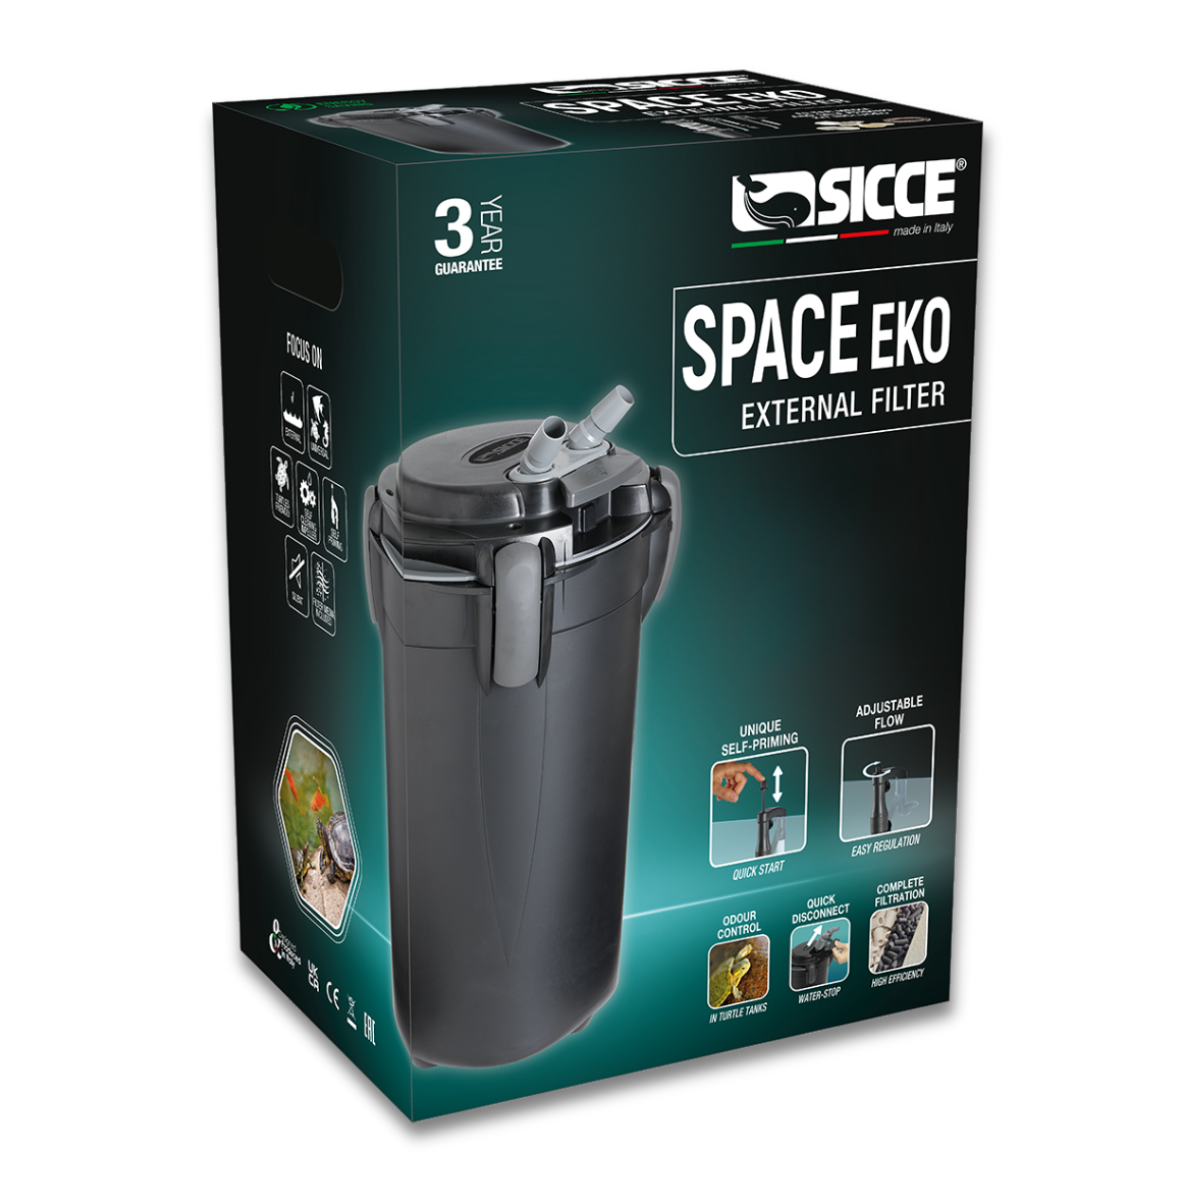 Space EKO canister filter